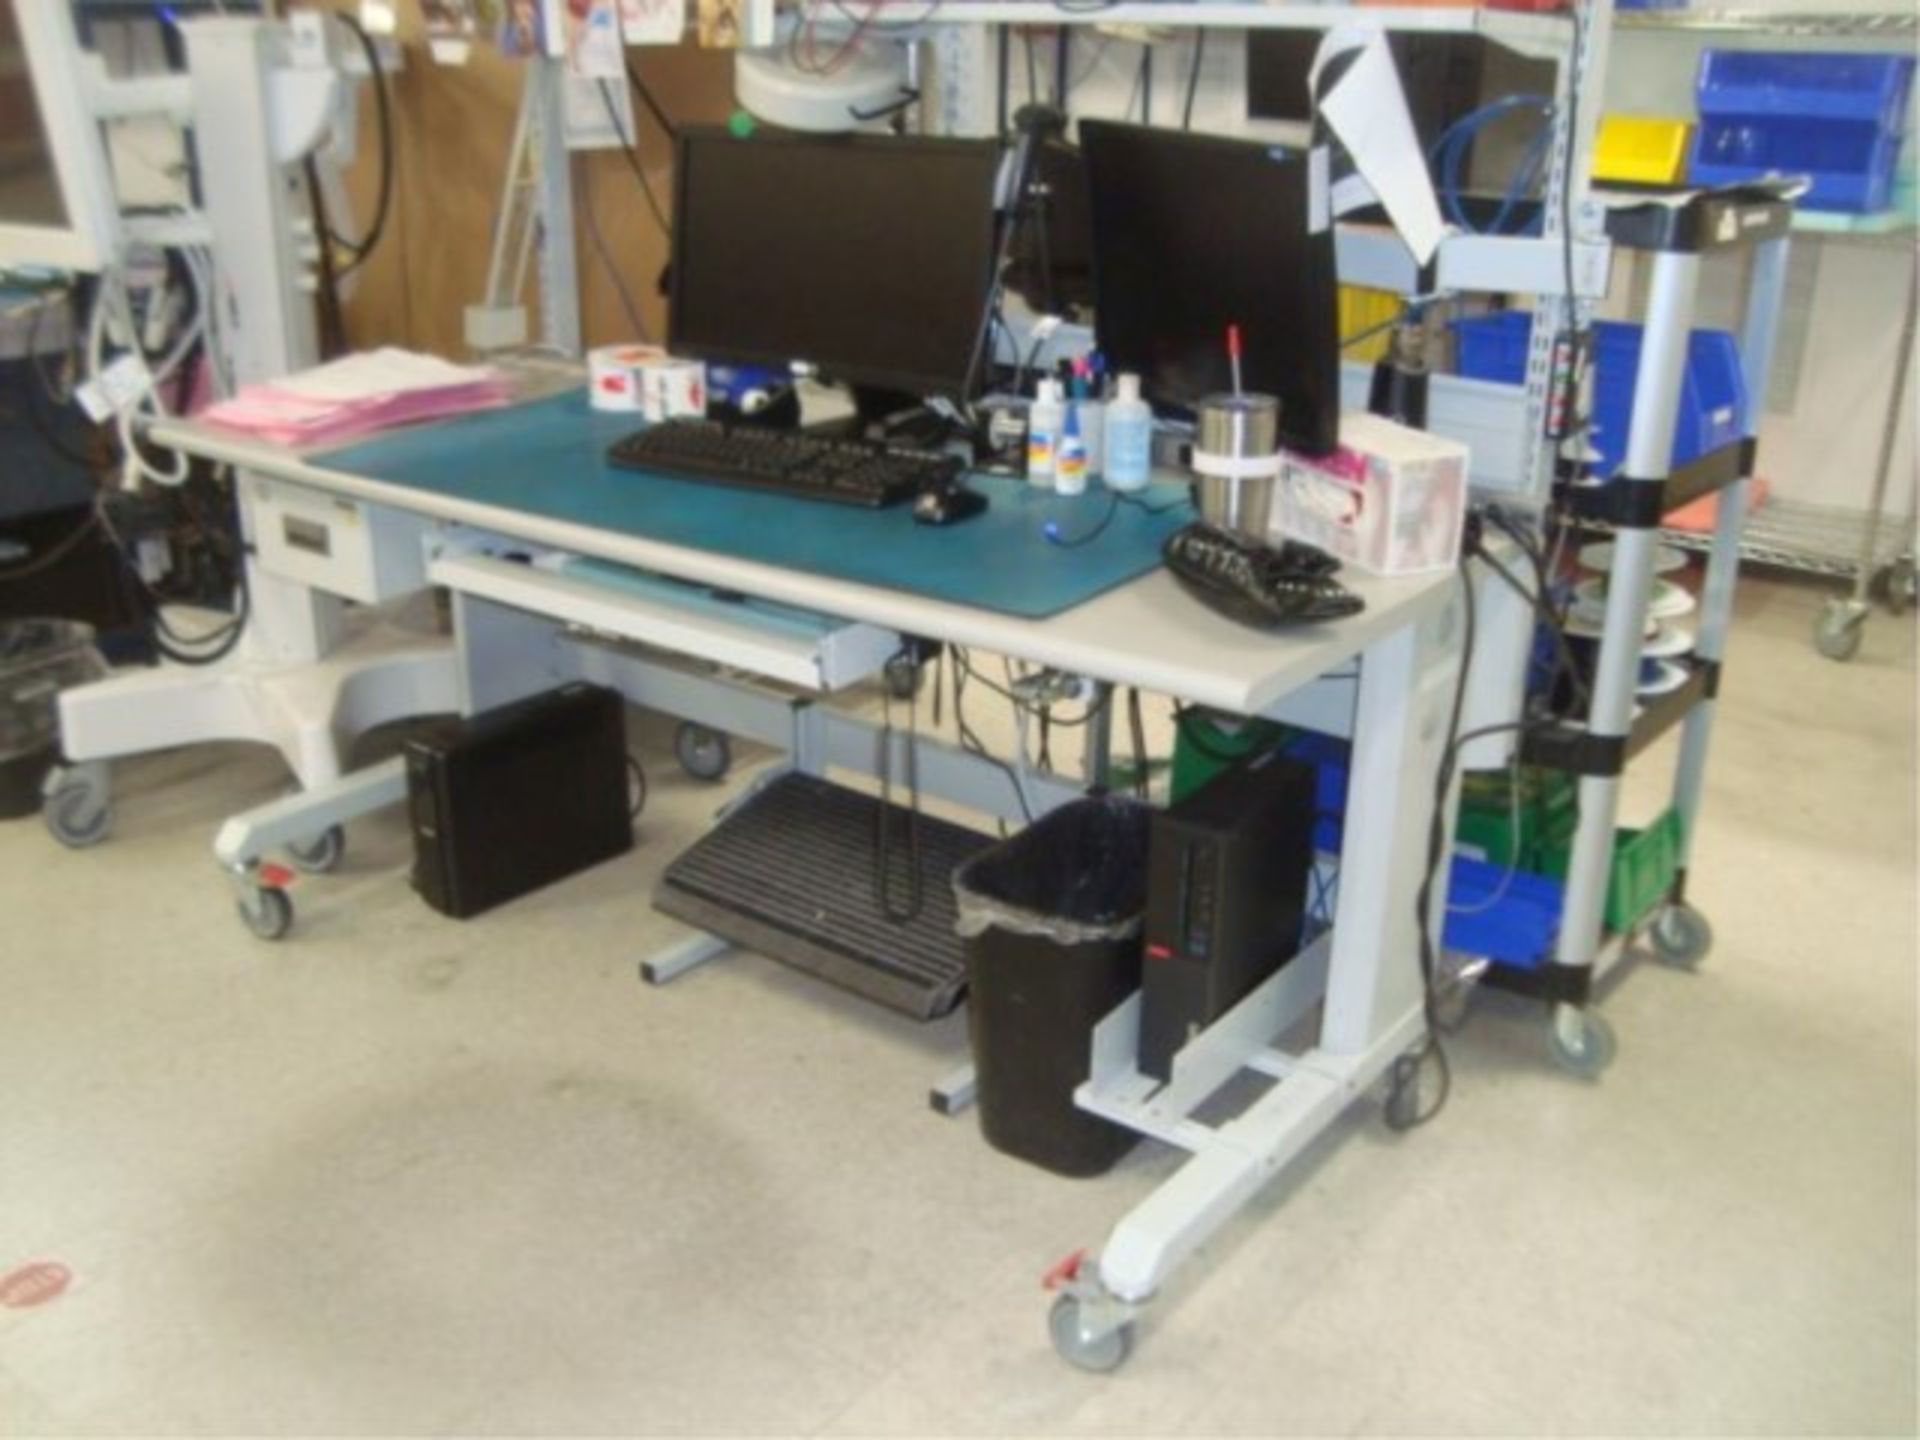 Mobile Workstation Benches - Image 7 of 9